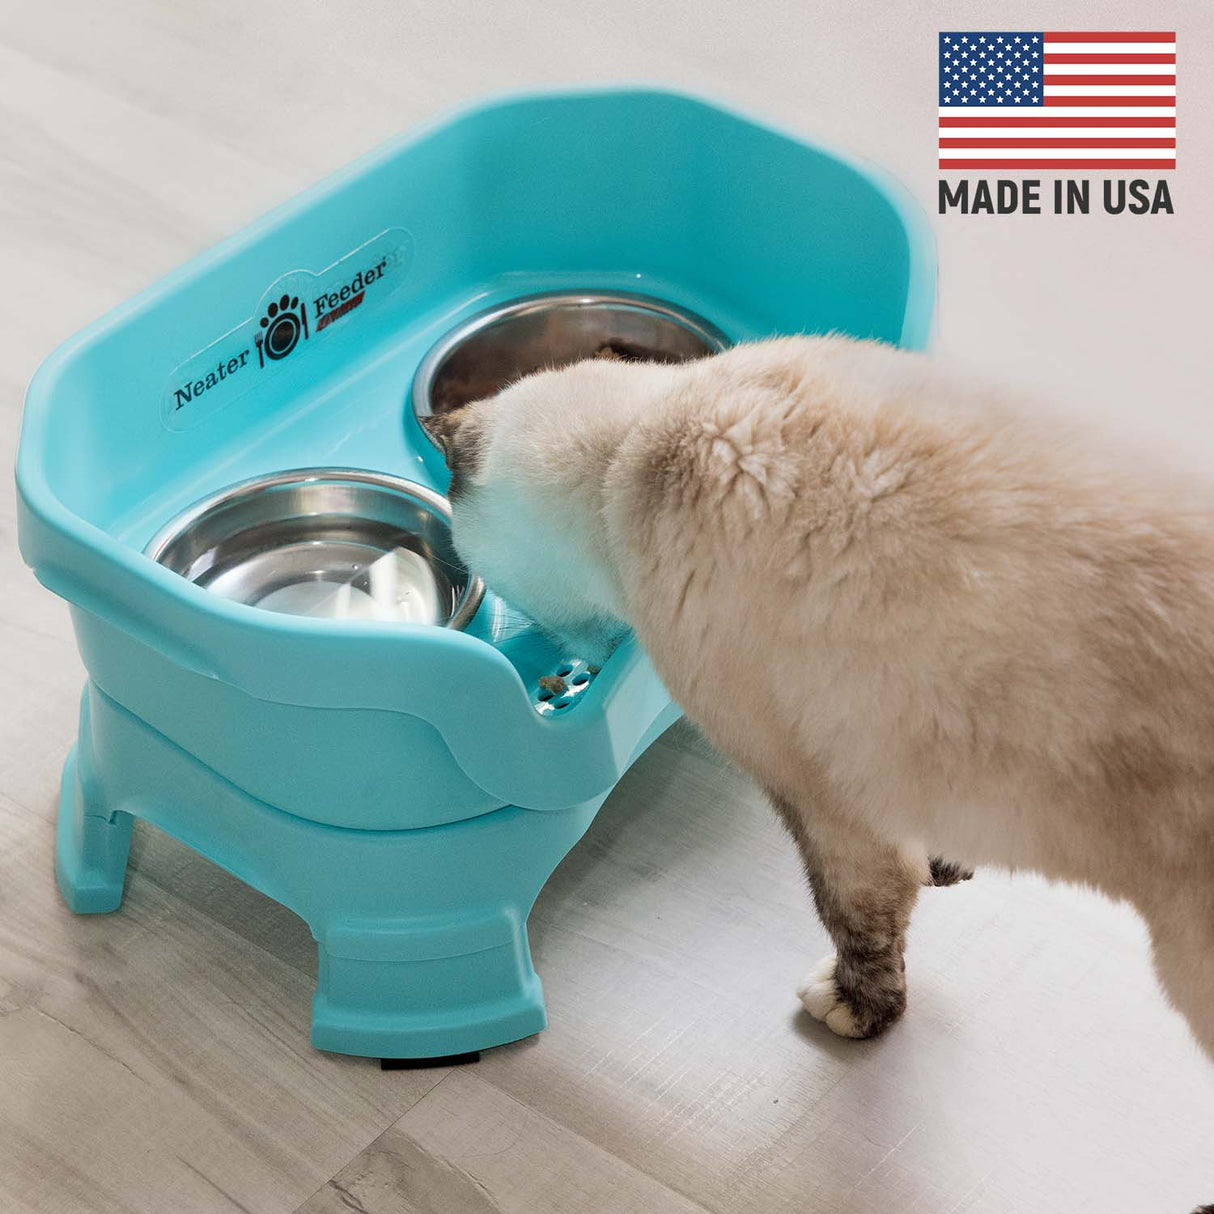 Cat eating from Aquamarine Neater Feeder Deluxe - Made in the USA